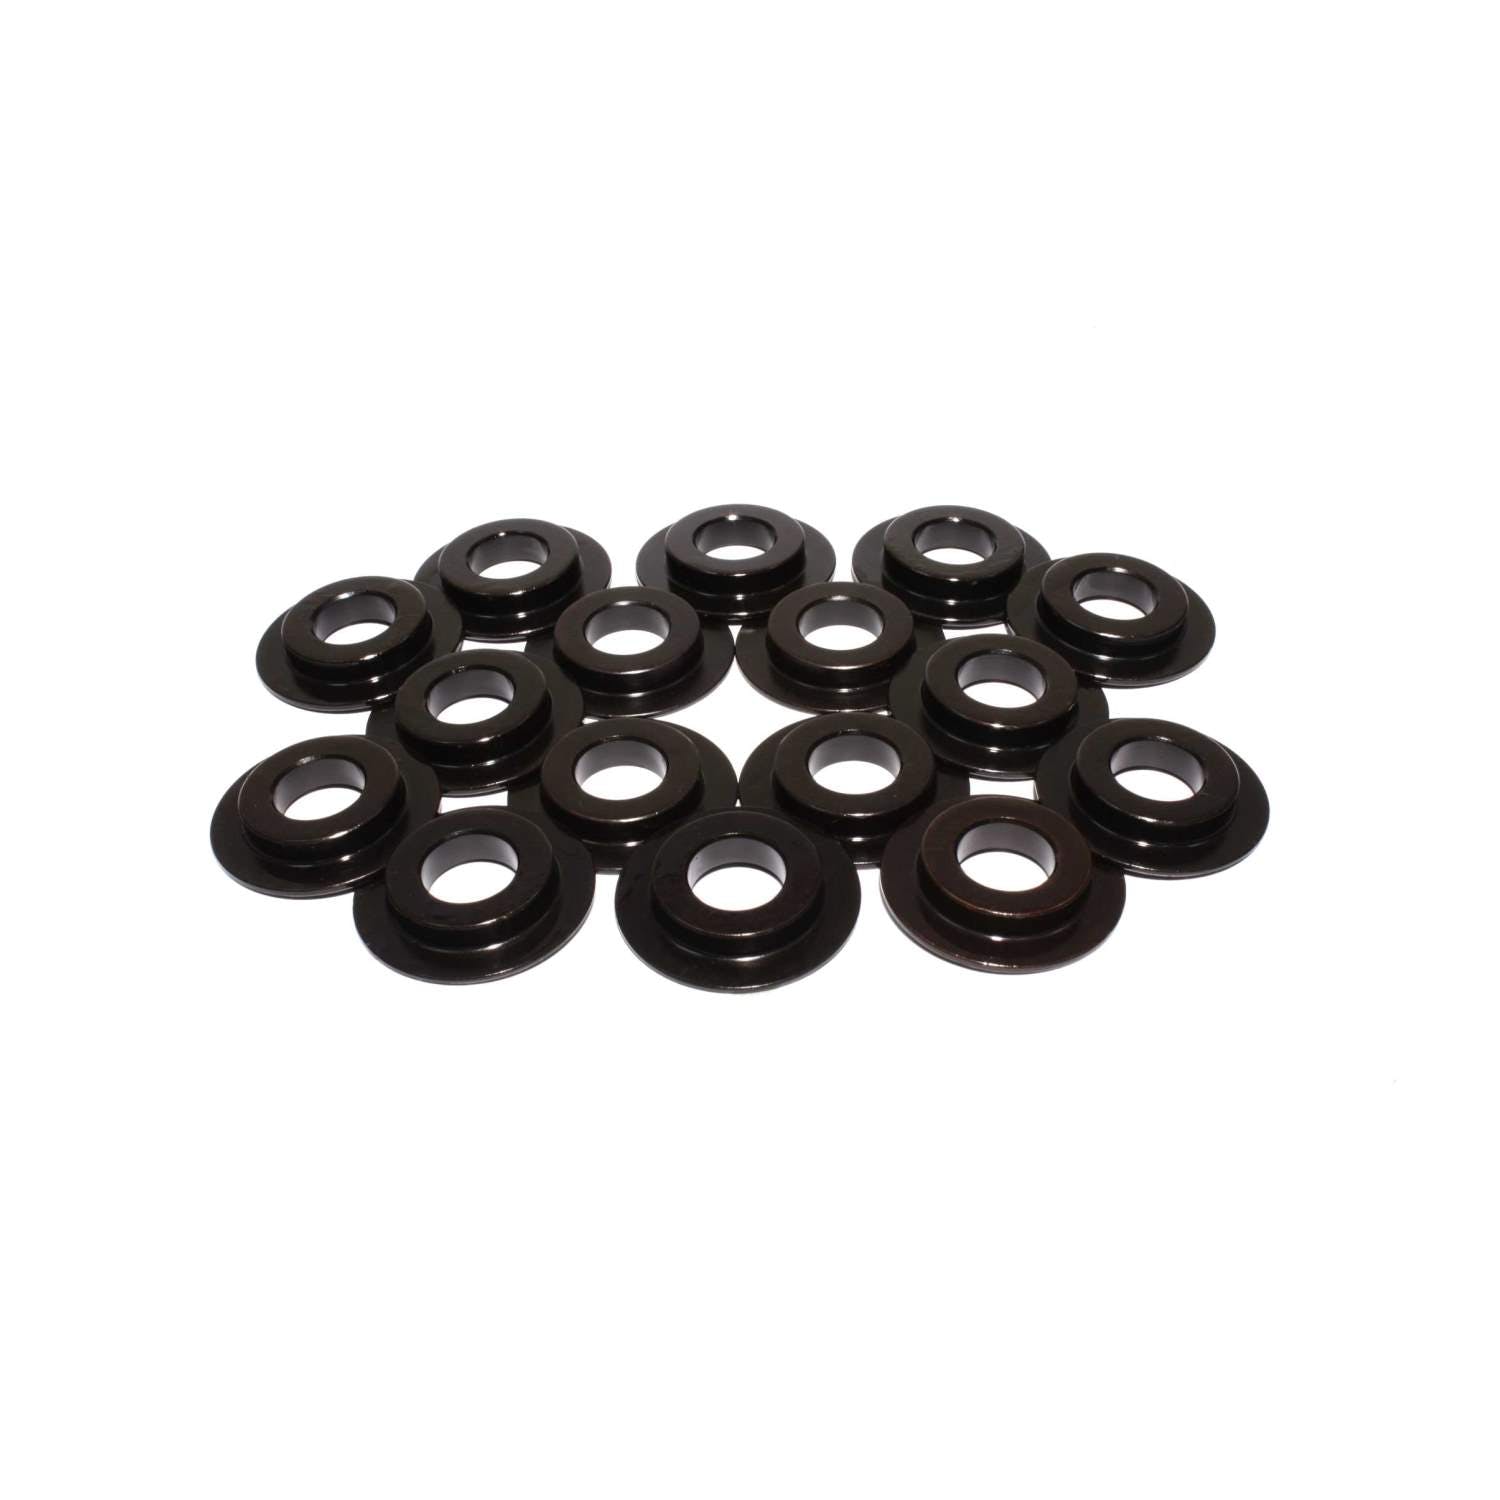 Competition Cams 4670-16 ID Spring Locator Set of 16 - 1.420 inch OD, .570 inch ID, .060 inch Thickness